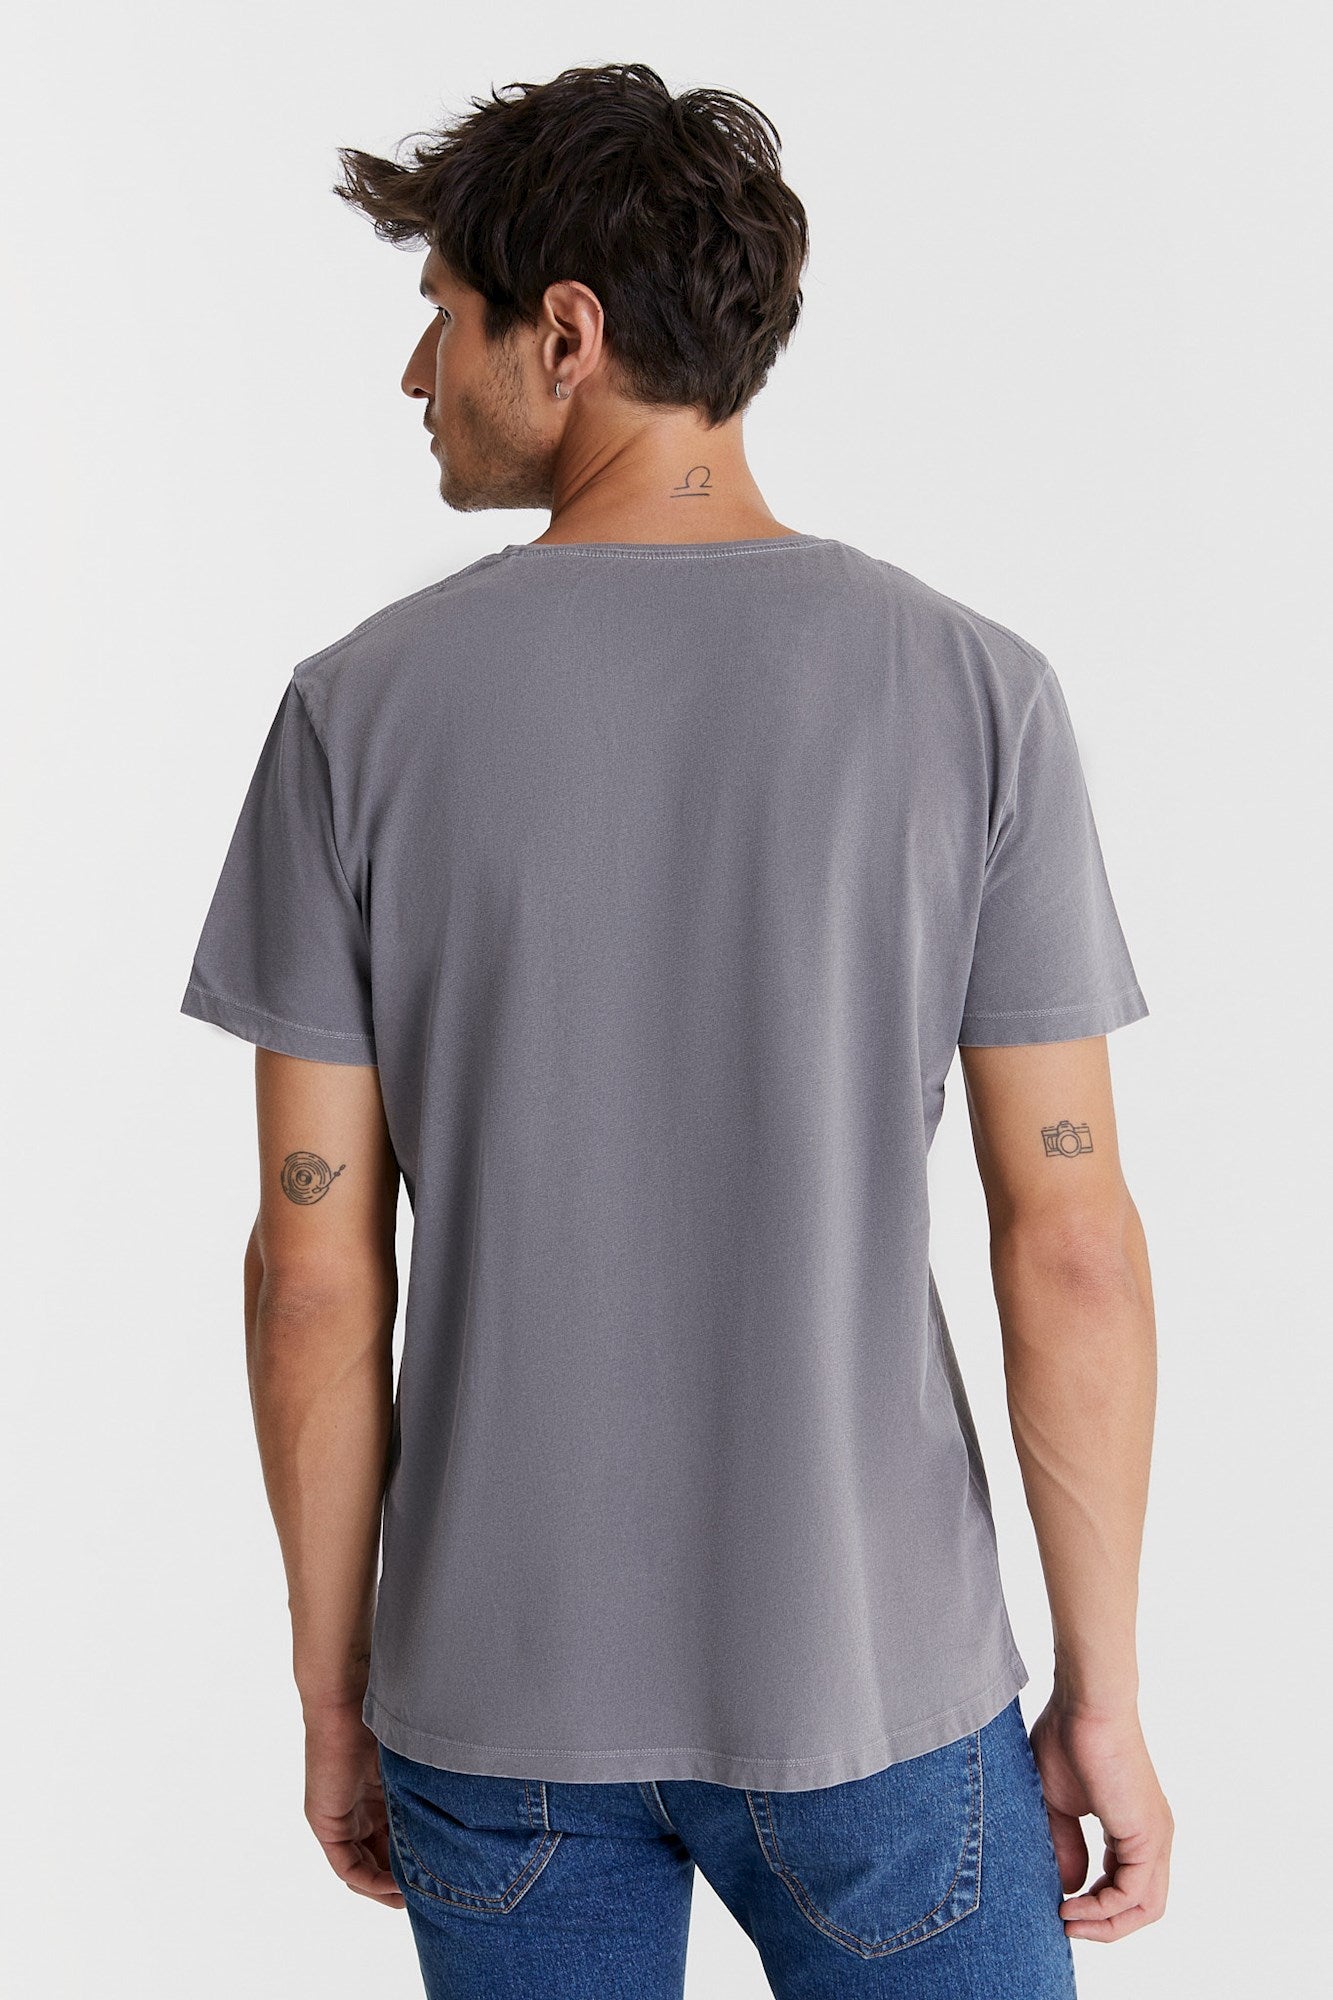 Coy - T-shirt - Anthracite